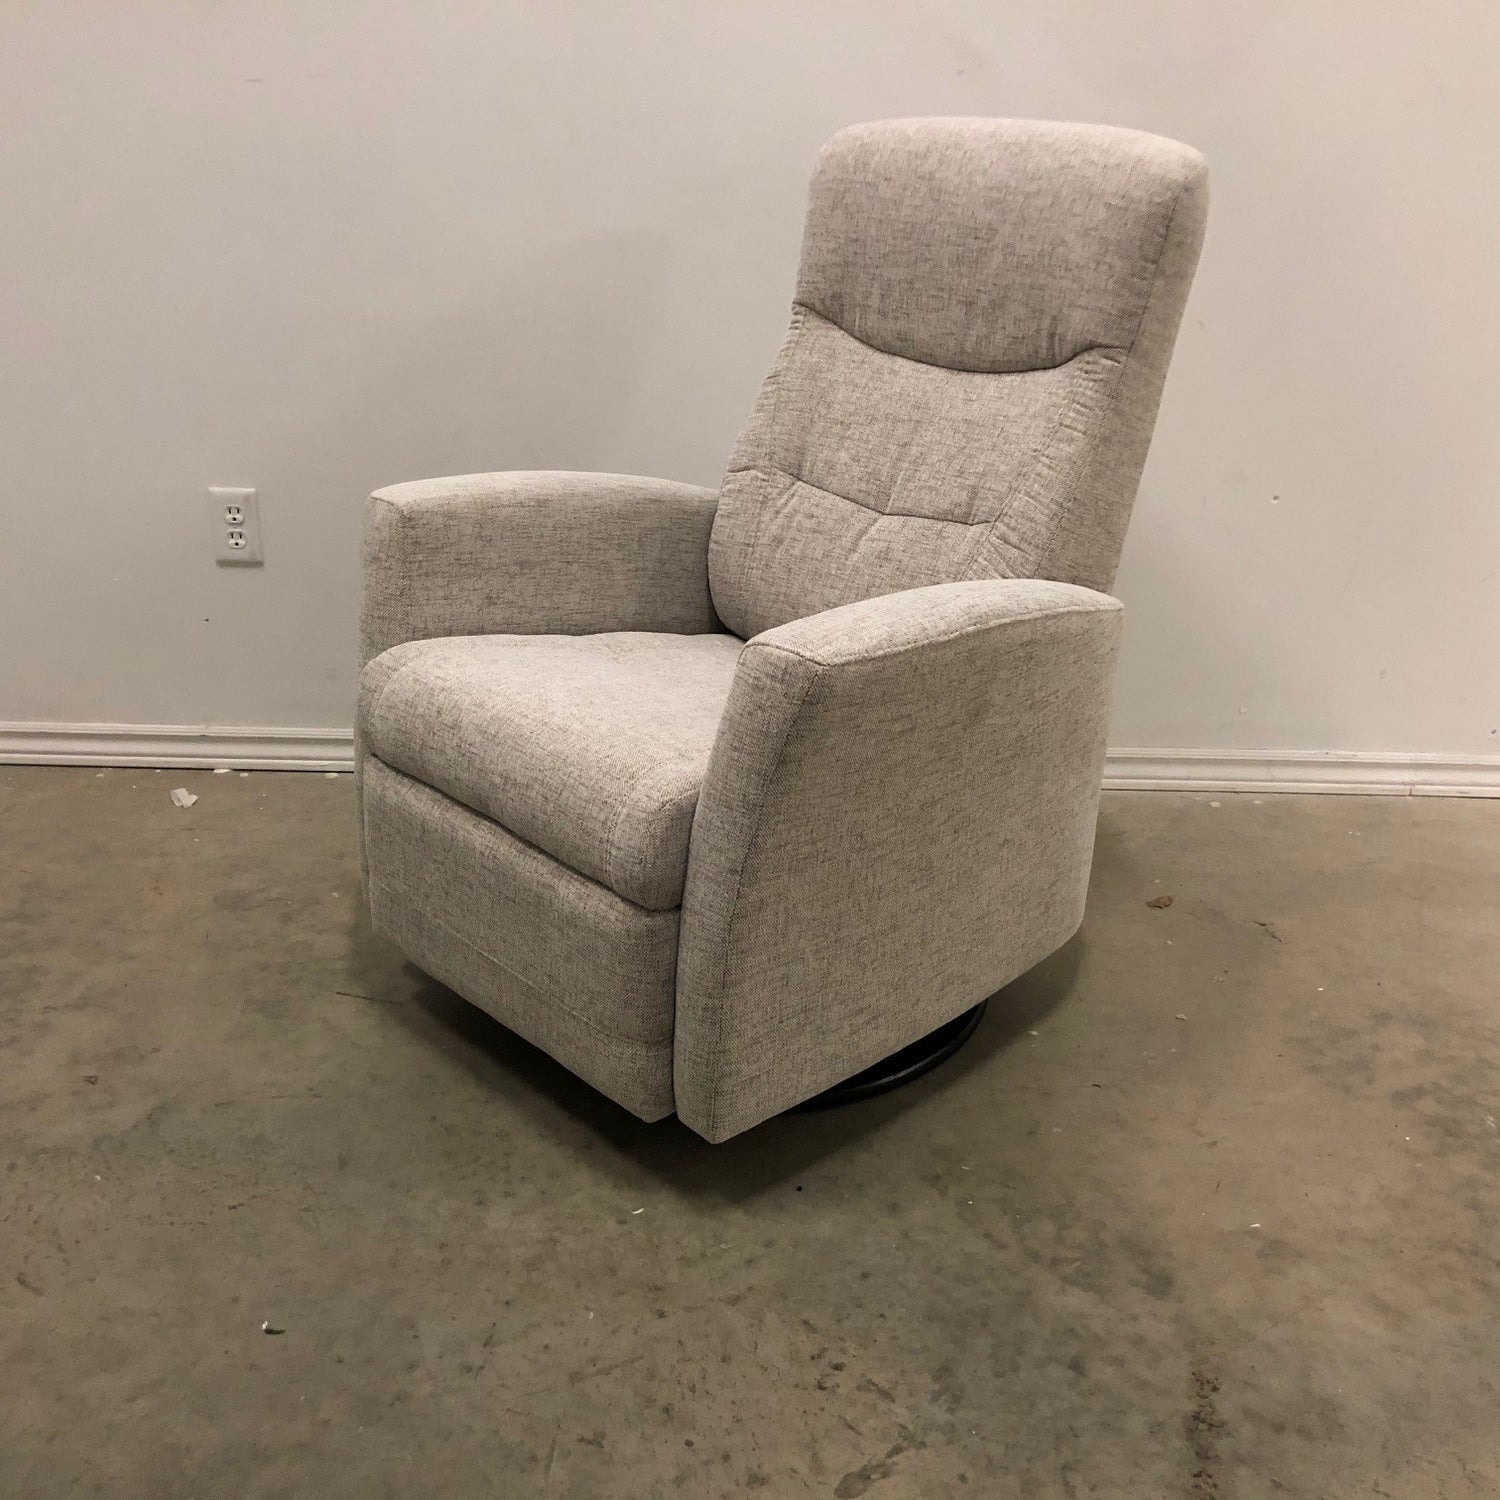 OSLO SWING RELAXER RECLINER FABRIC